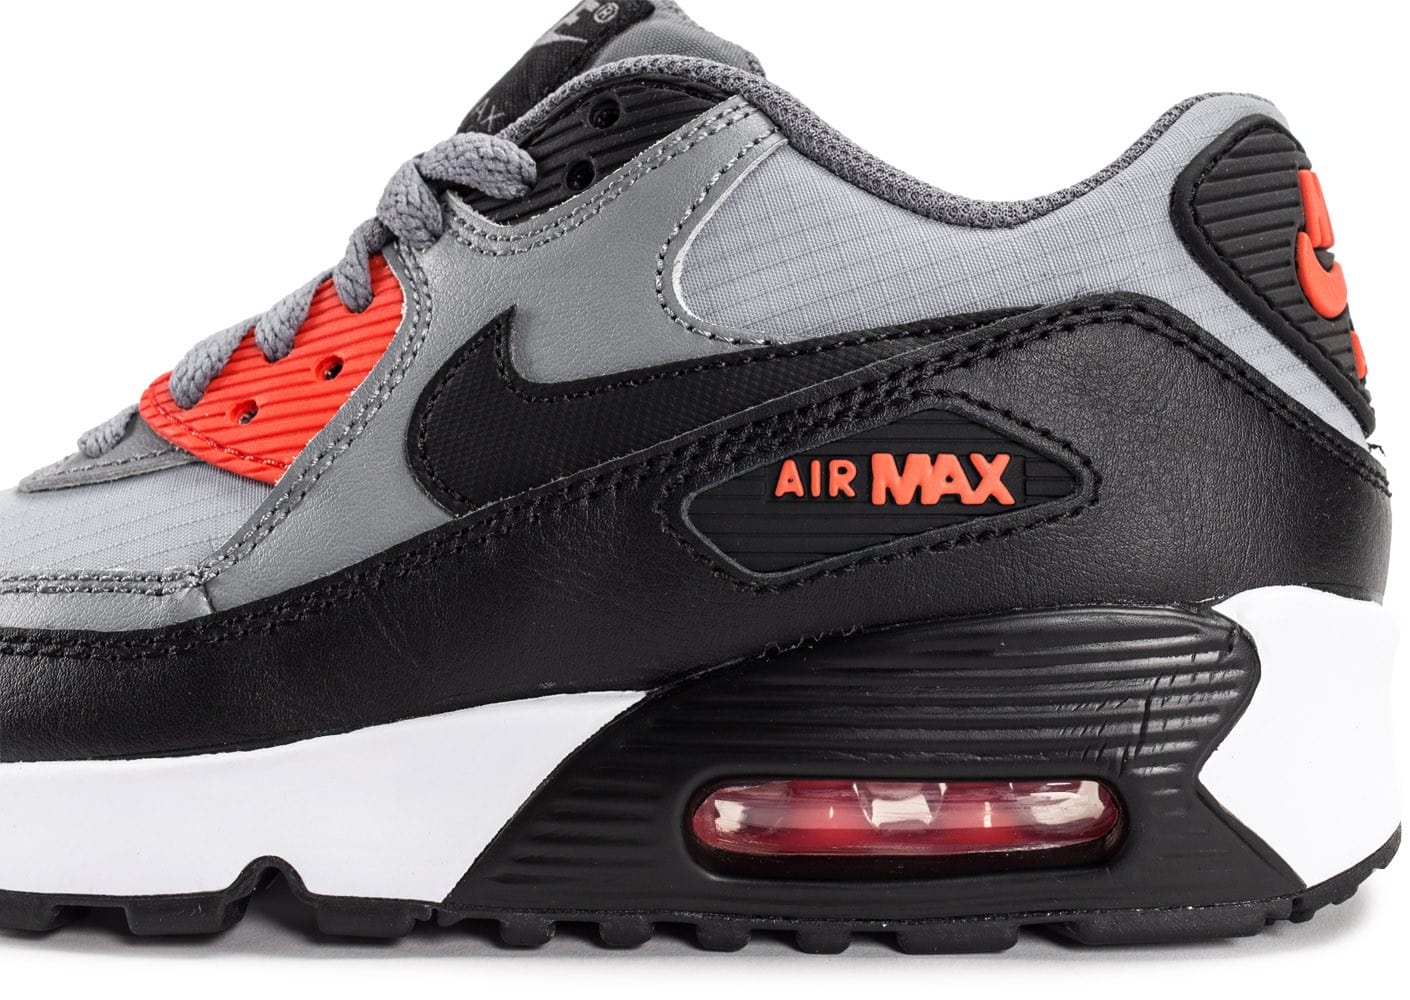 nike air max 90 junior anthracite, ... Chaussures Nike Air Max 90 Mesh Junior anthracite vue dessus